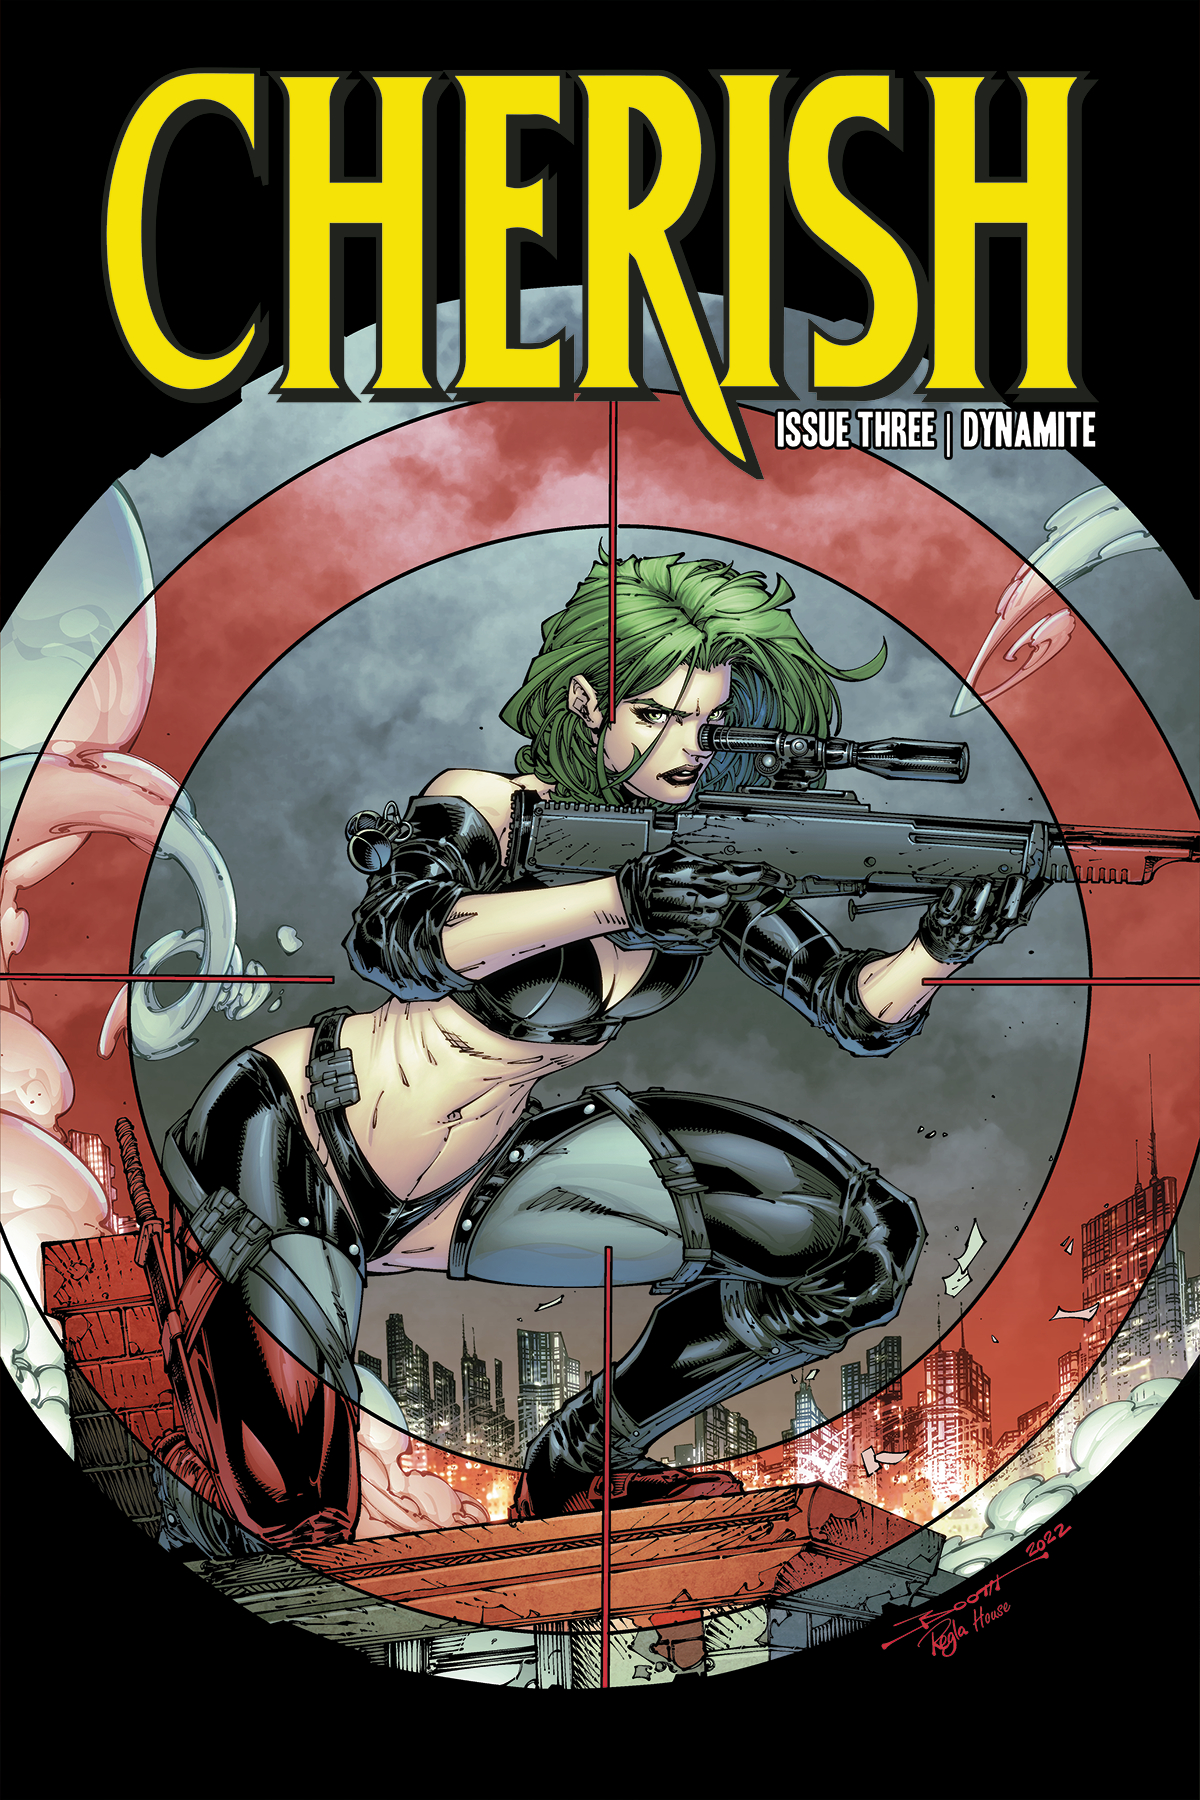 Cherish #4 Cover A Booth